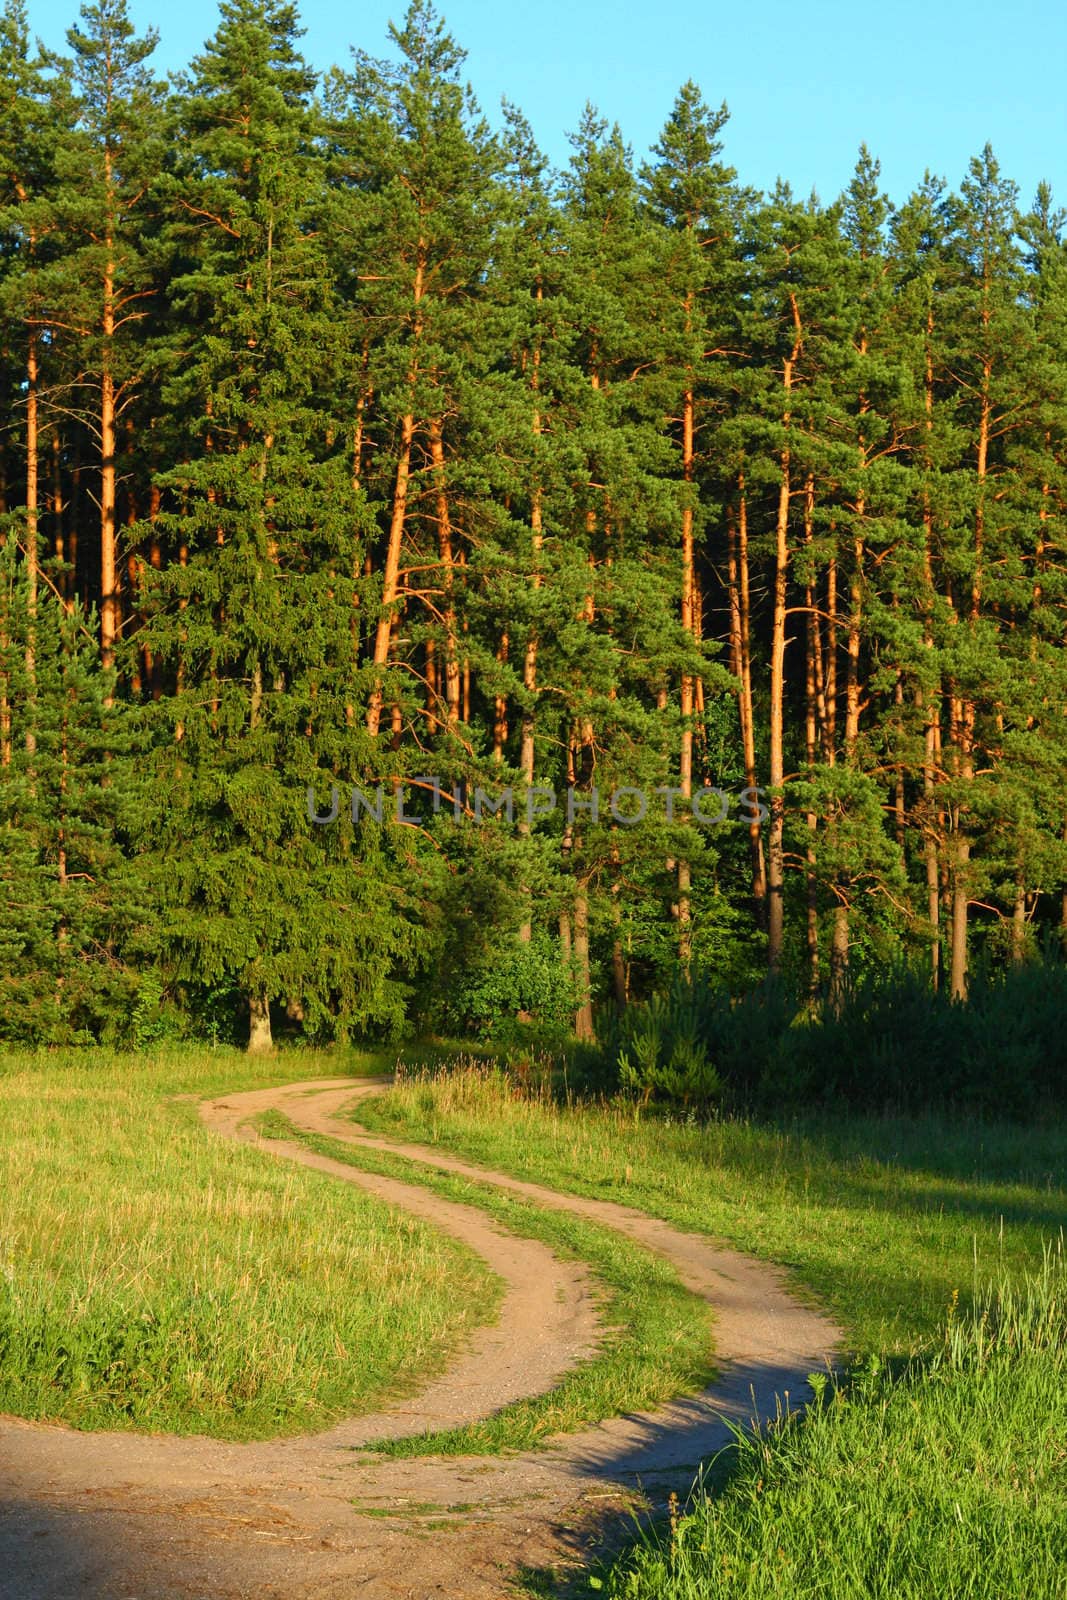 A rural road entering the forest during sunny day